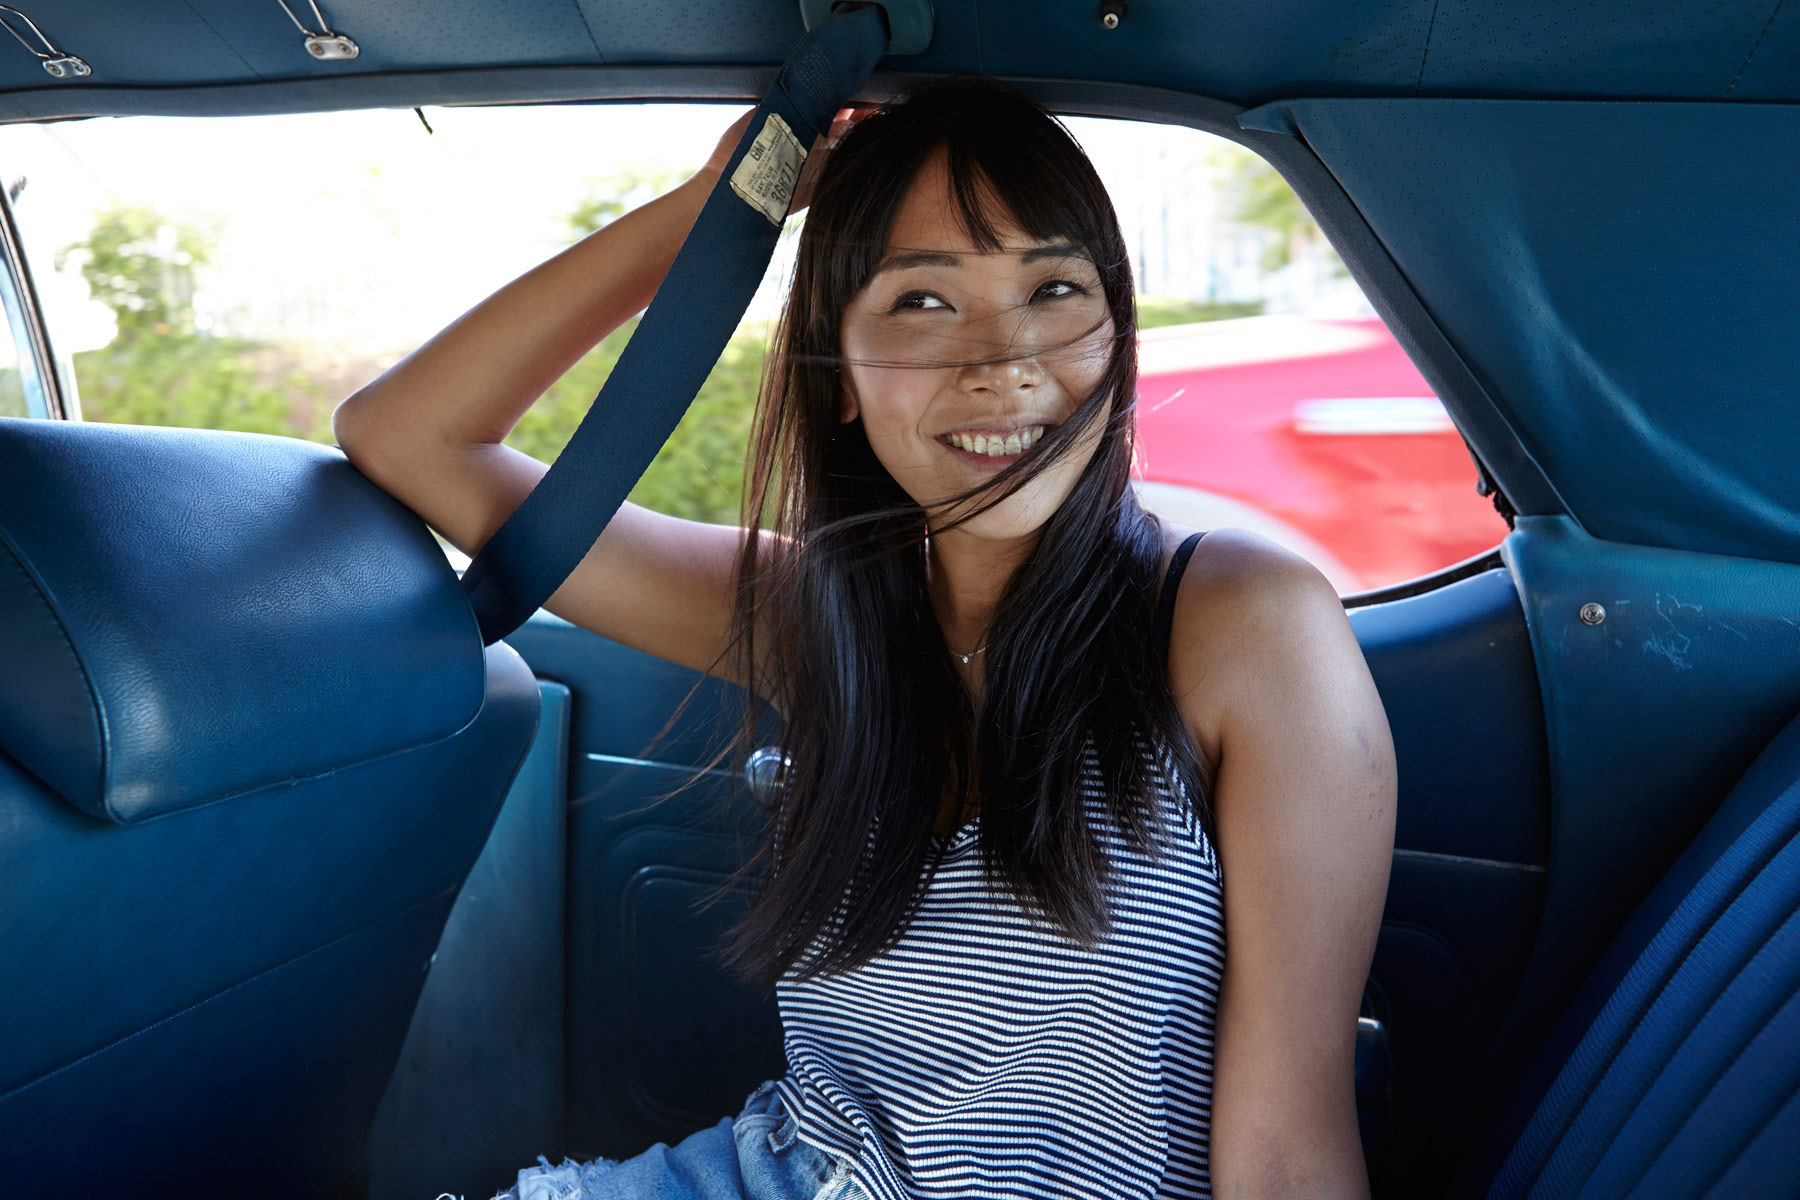 Lifestyle_Photographer_Edgy_Young_Woman_Asian_Millennial_Levis_Advertising_Los_Angeles_Chicago_Mexico_City_Girl_in_Back_Seat_Car_Auto_Wind_Blowing_Hair_Asian_Millennial_Chicago_Photographer_Mike_Henry